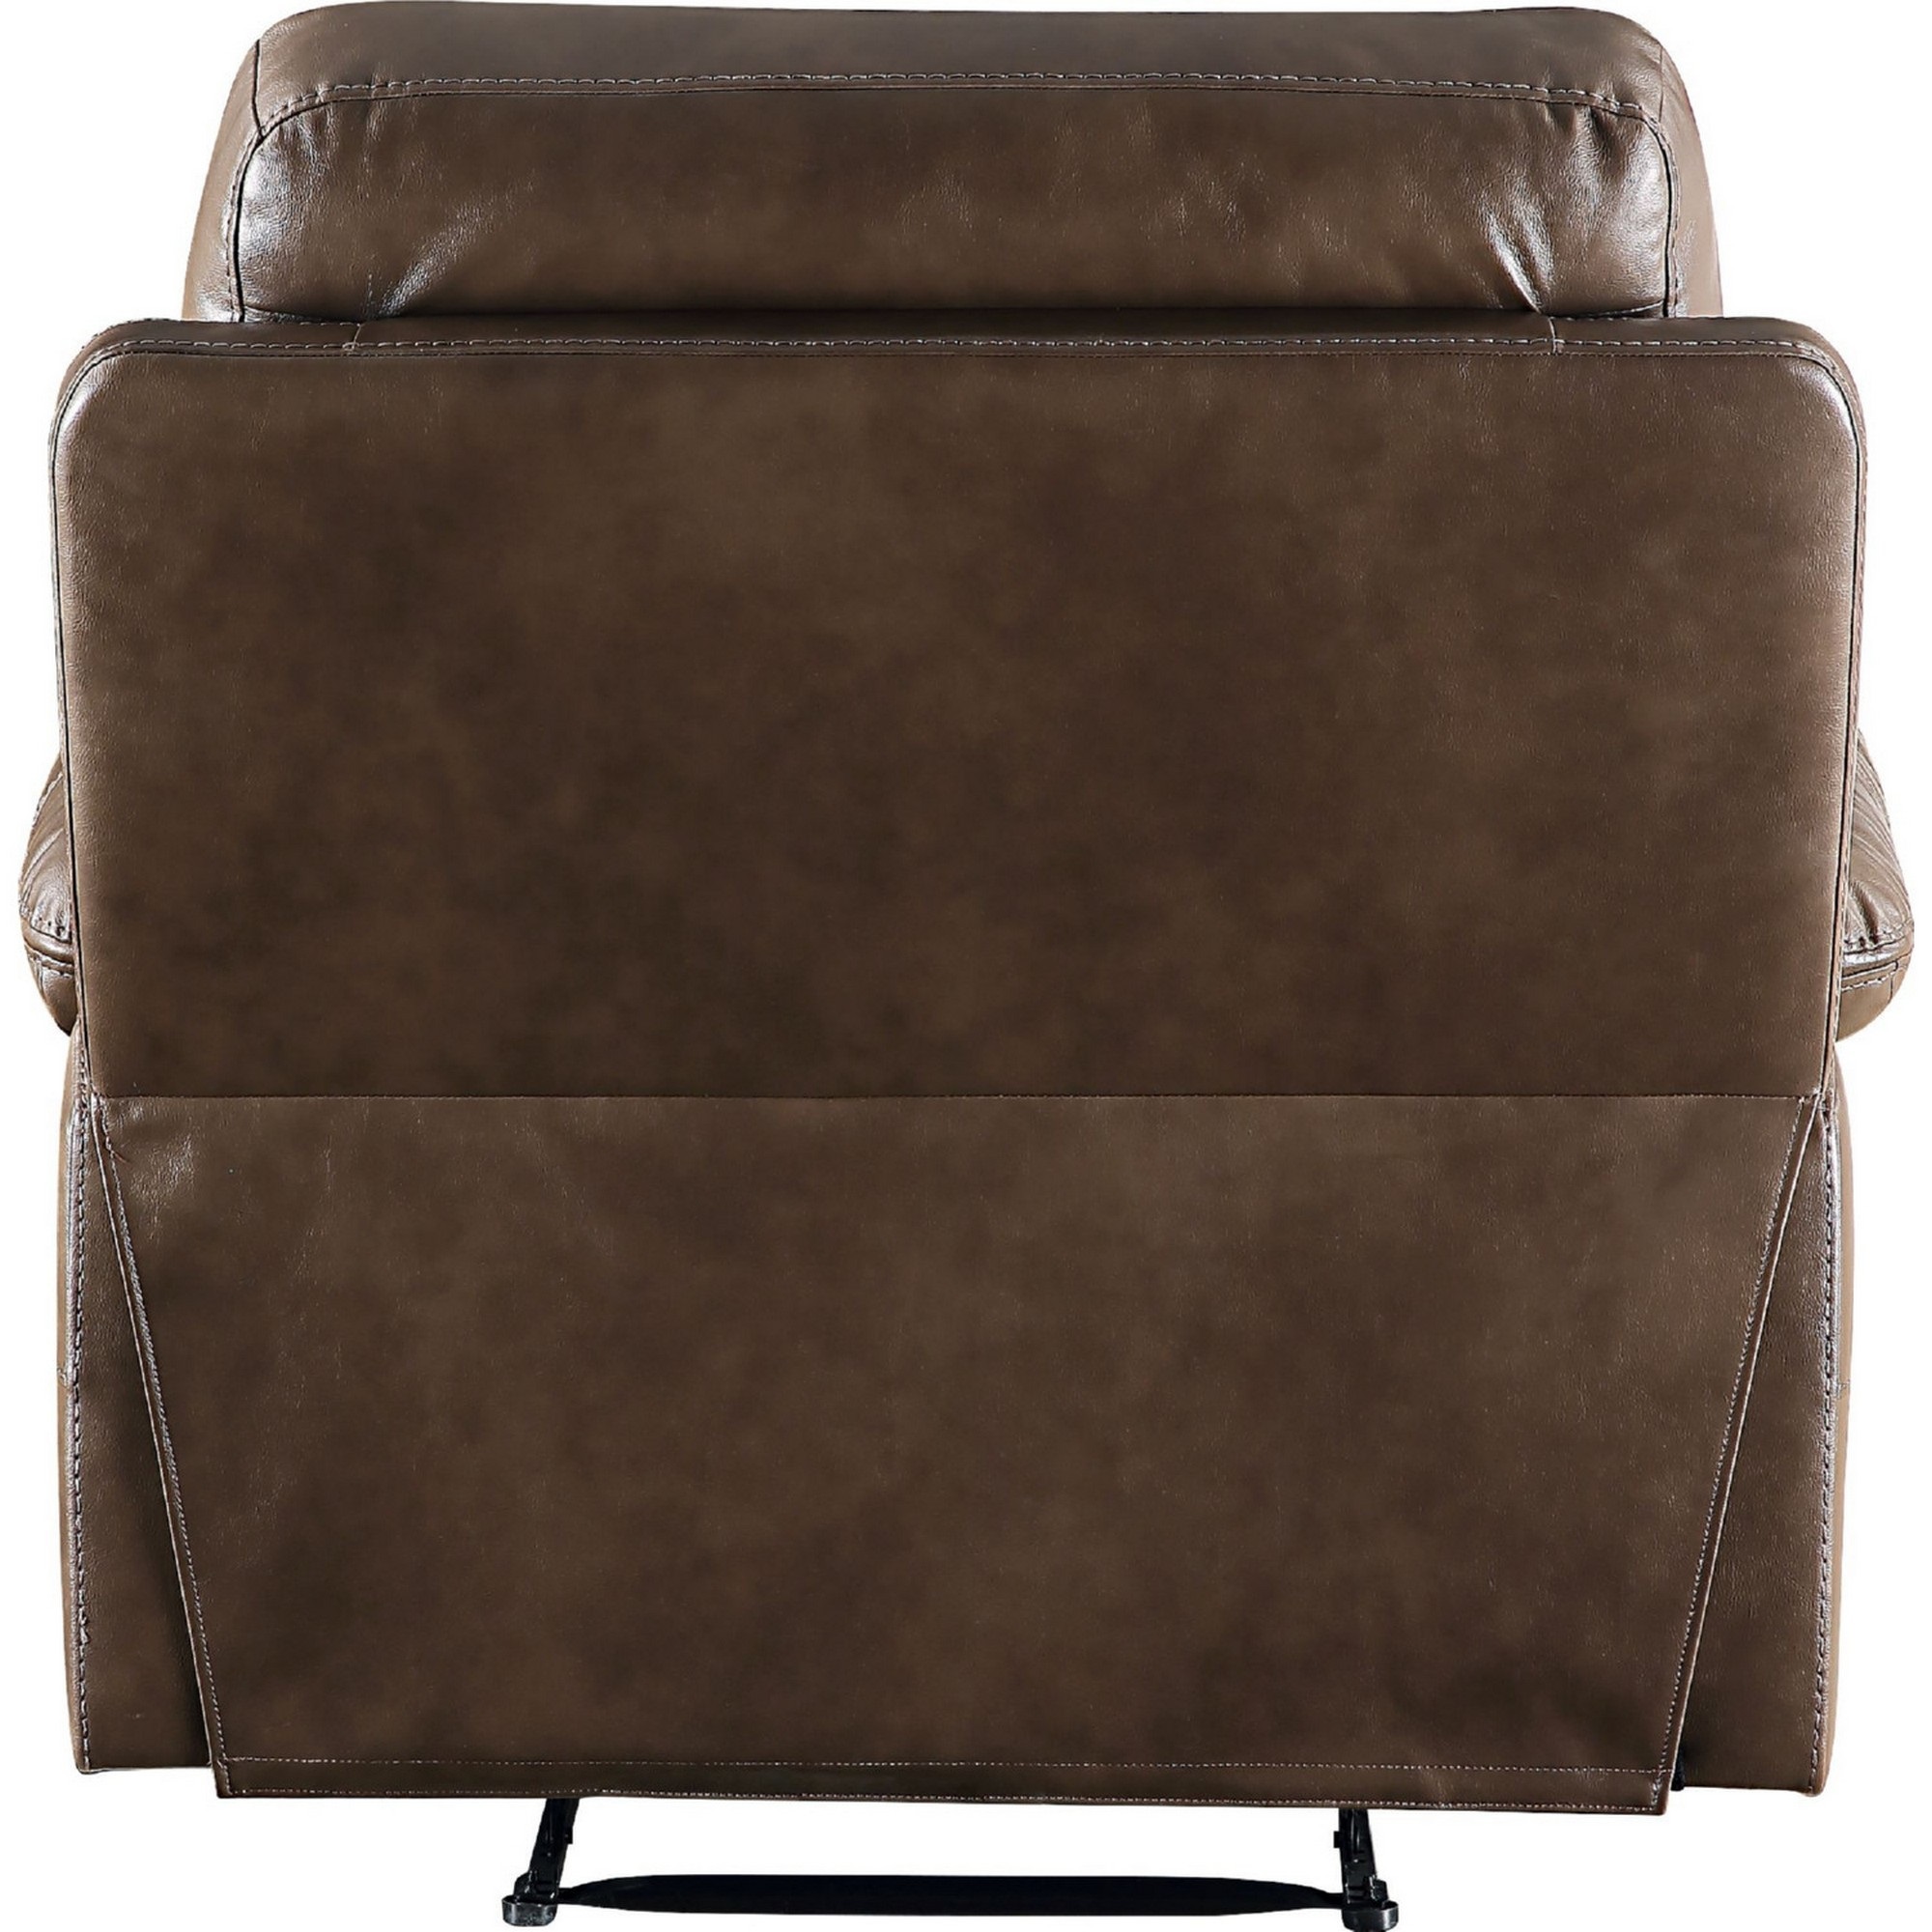 Benjara Leatherette Power Recliner with Nailhead Trim Accent, Brown